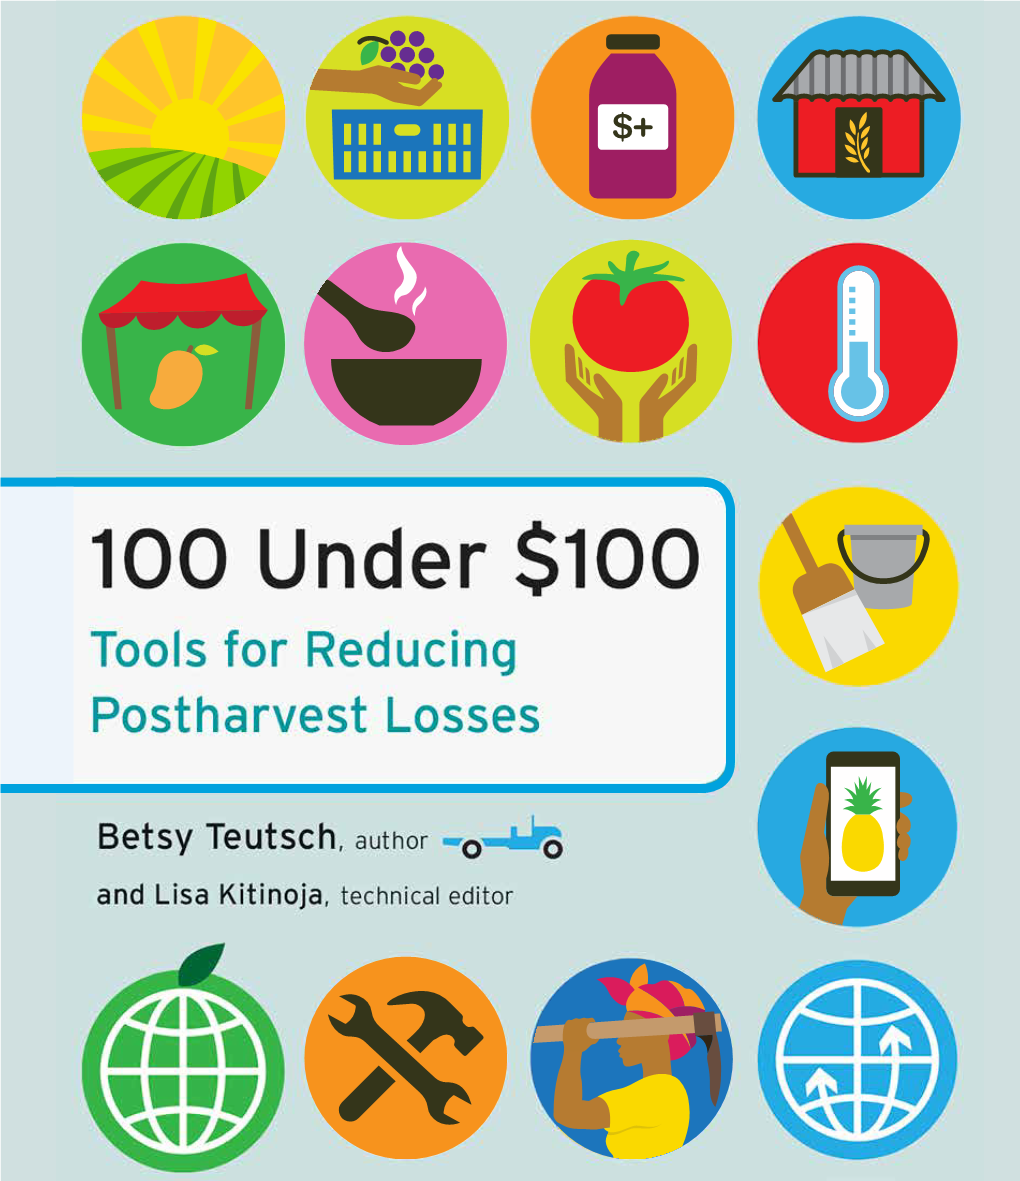 100 Under $100: Tools for Reducing Postharvest Losses 100 UNDER $100: TOOLS for REDUCING POSTHARVEST LOSSES